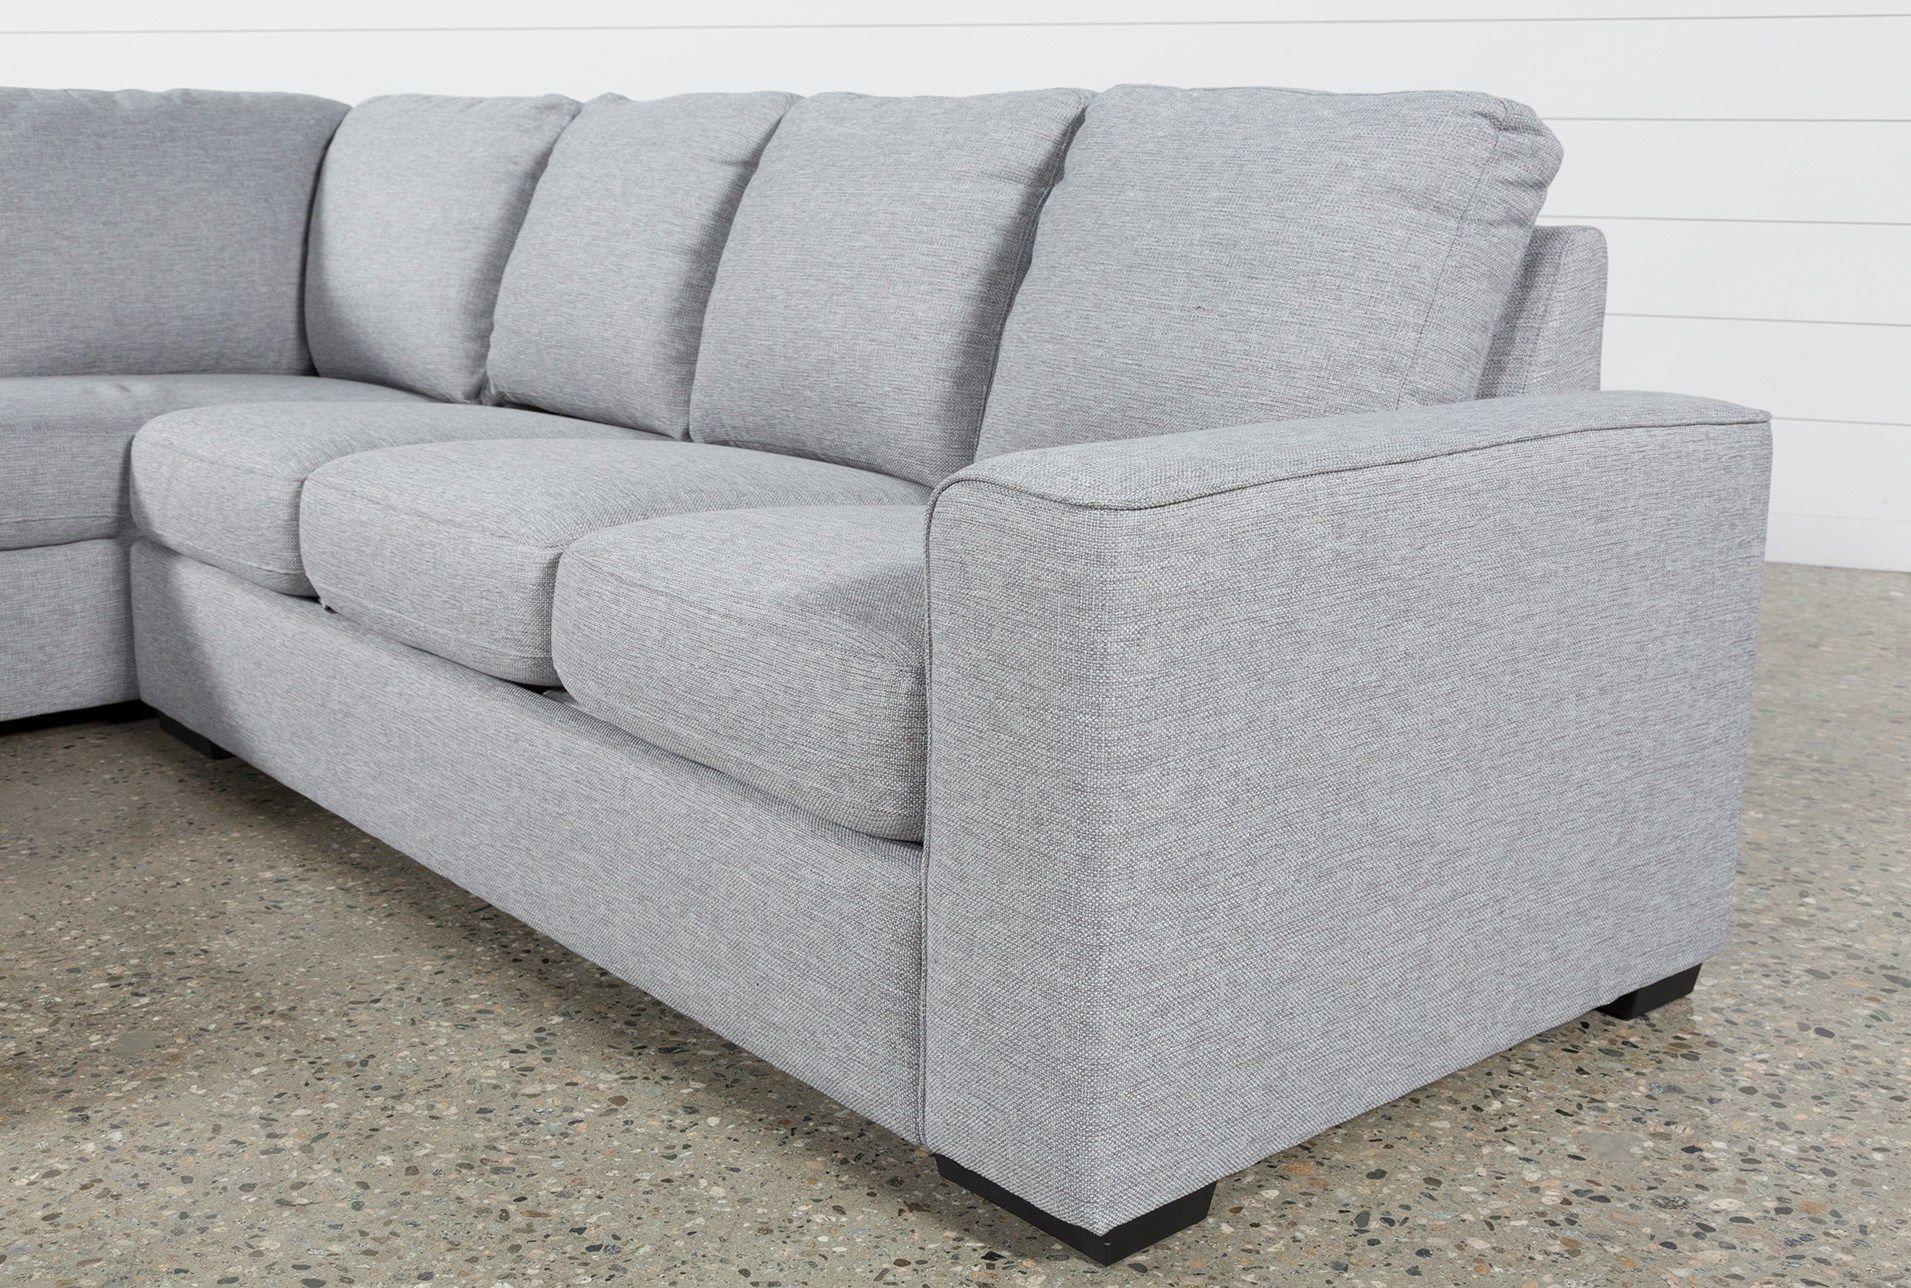 Lucy Grey 2 Piece Sectional W/laf Chaise | Gray And Room With Lucy Grey 2 Piece Sleeper Sectionals With Laf Chaise (View 9 of 30)